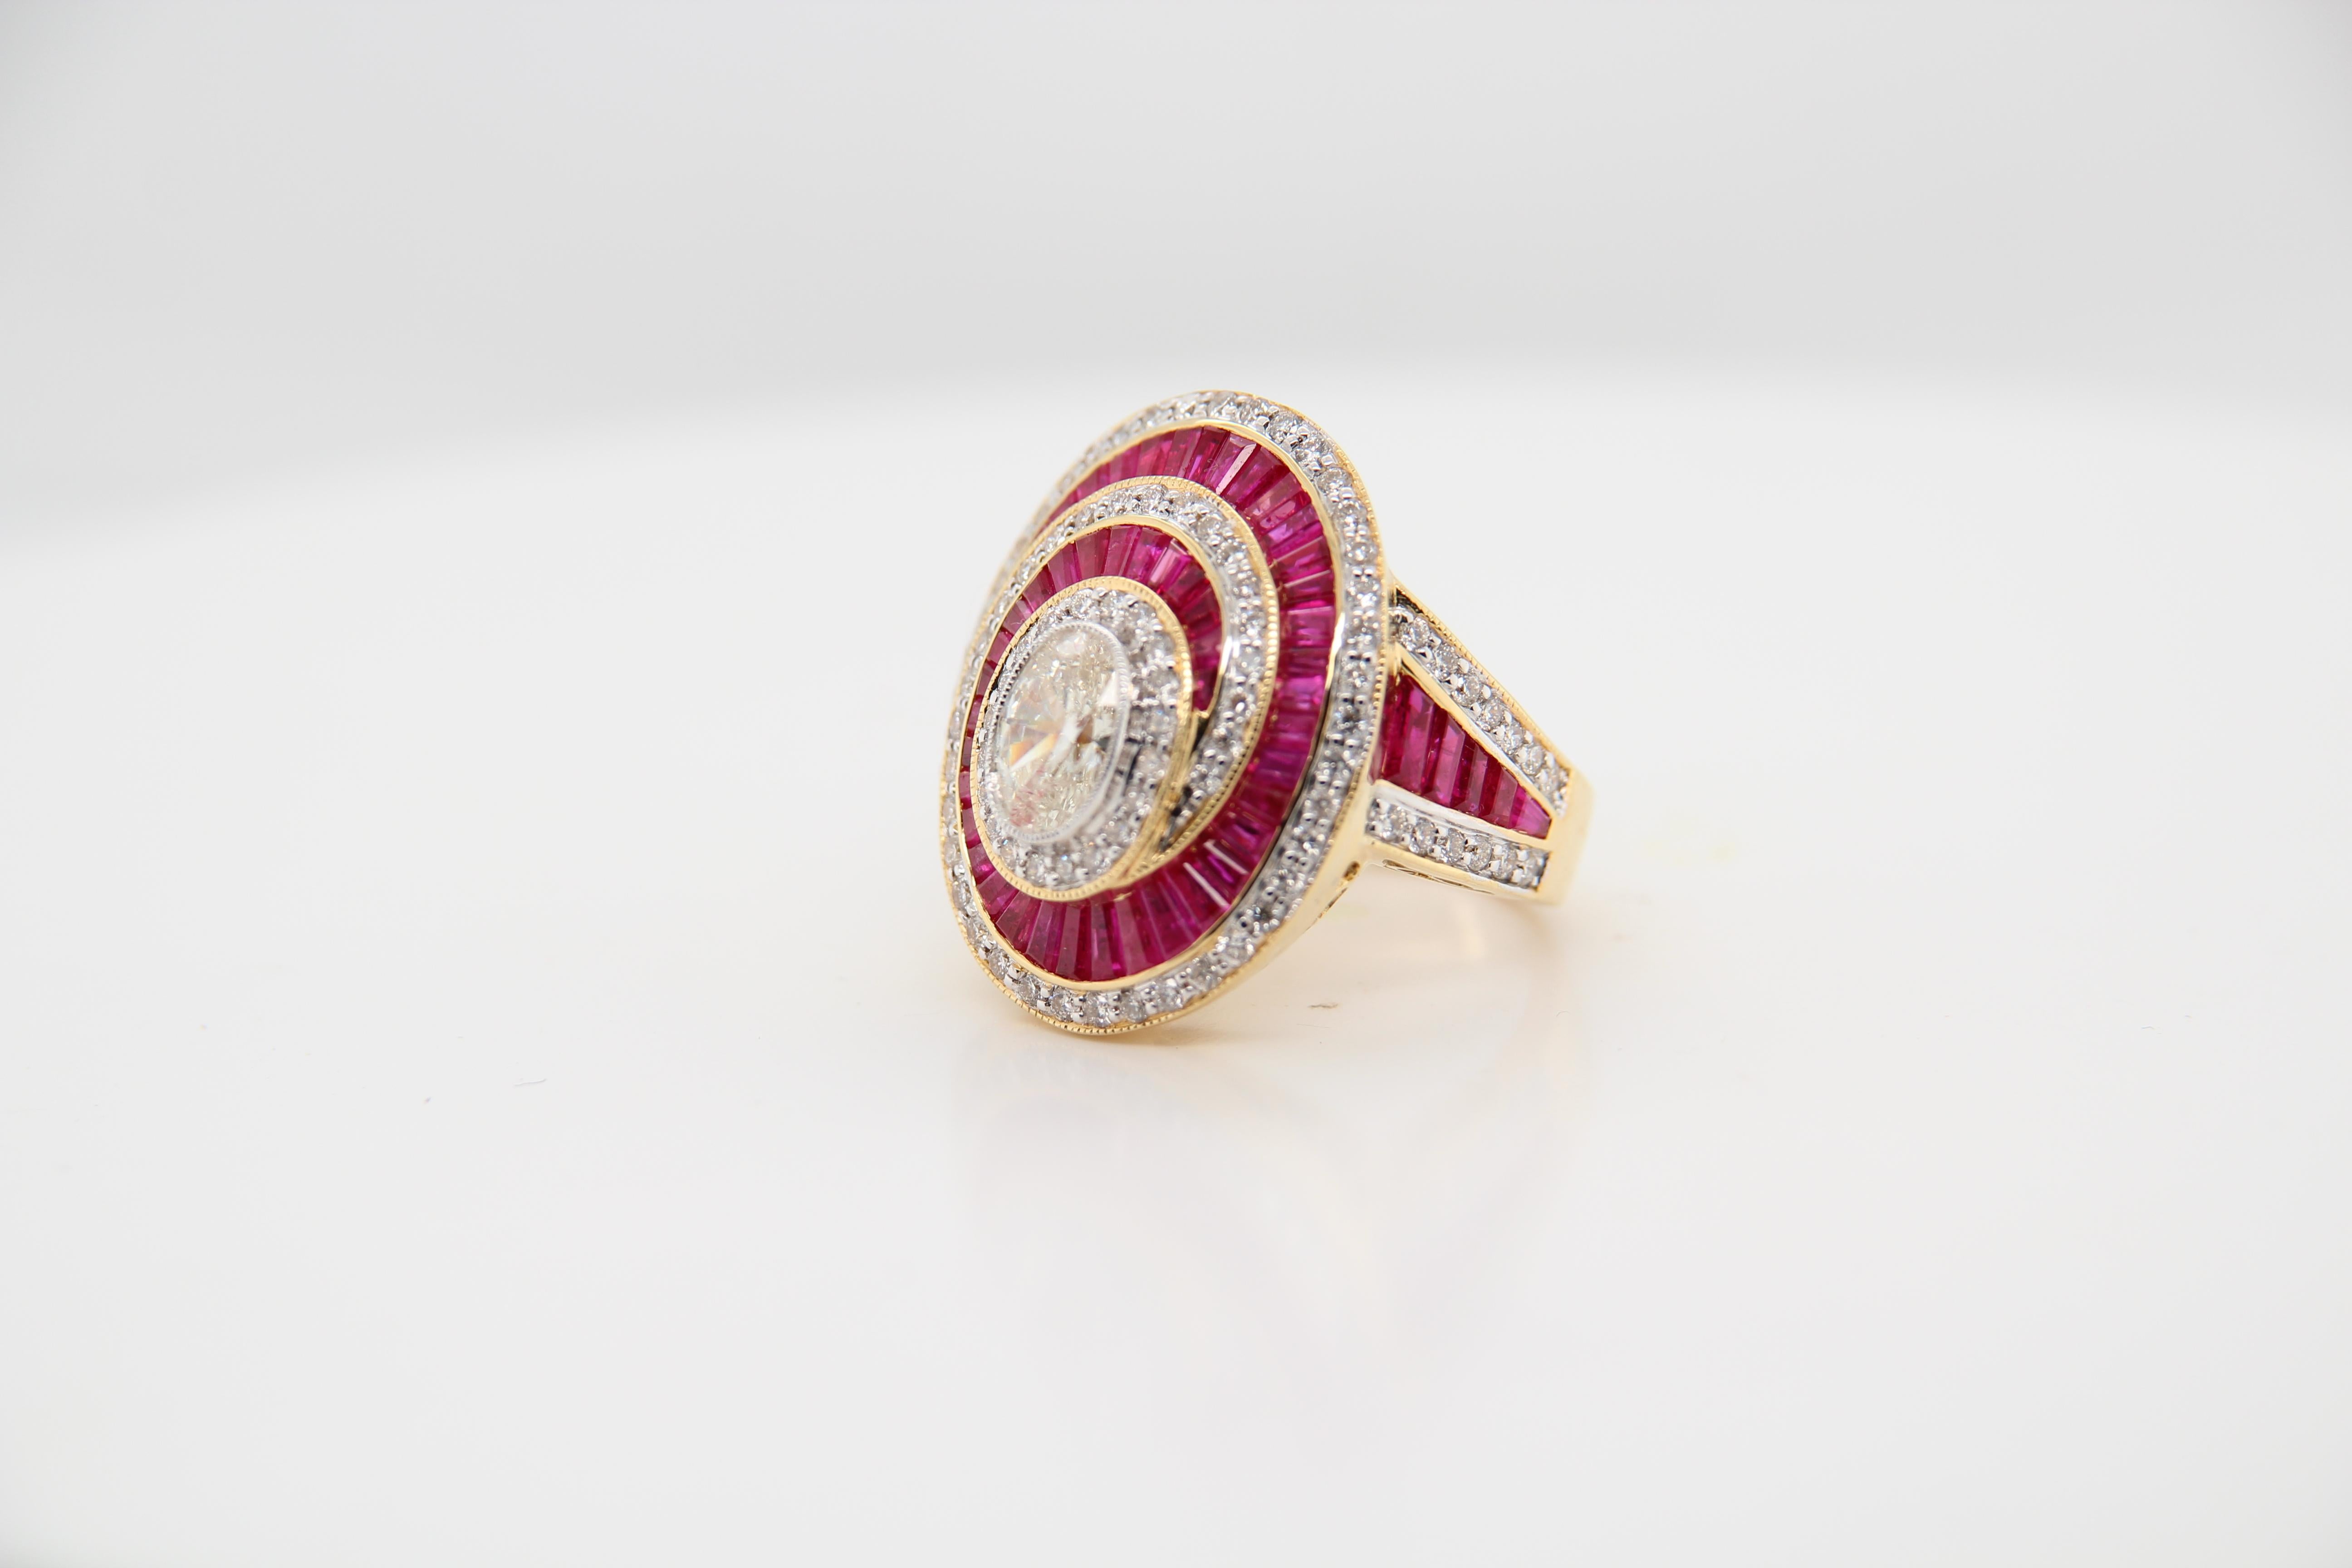 A diamond and ruby ring. The center stone is an oval shaped diamond weighing 0.97 carat surrounded by 1.05 carat diamonds and 2.63 carat rubies. The ring is made in 18 karat 13.08 g gross weight white gold. It can be resized. 